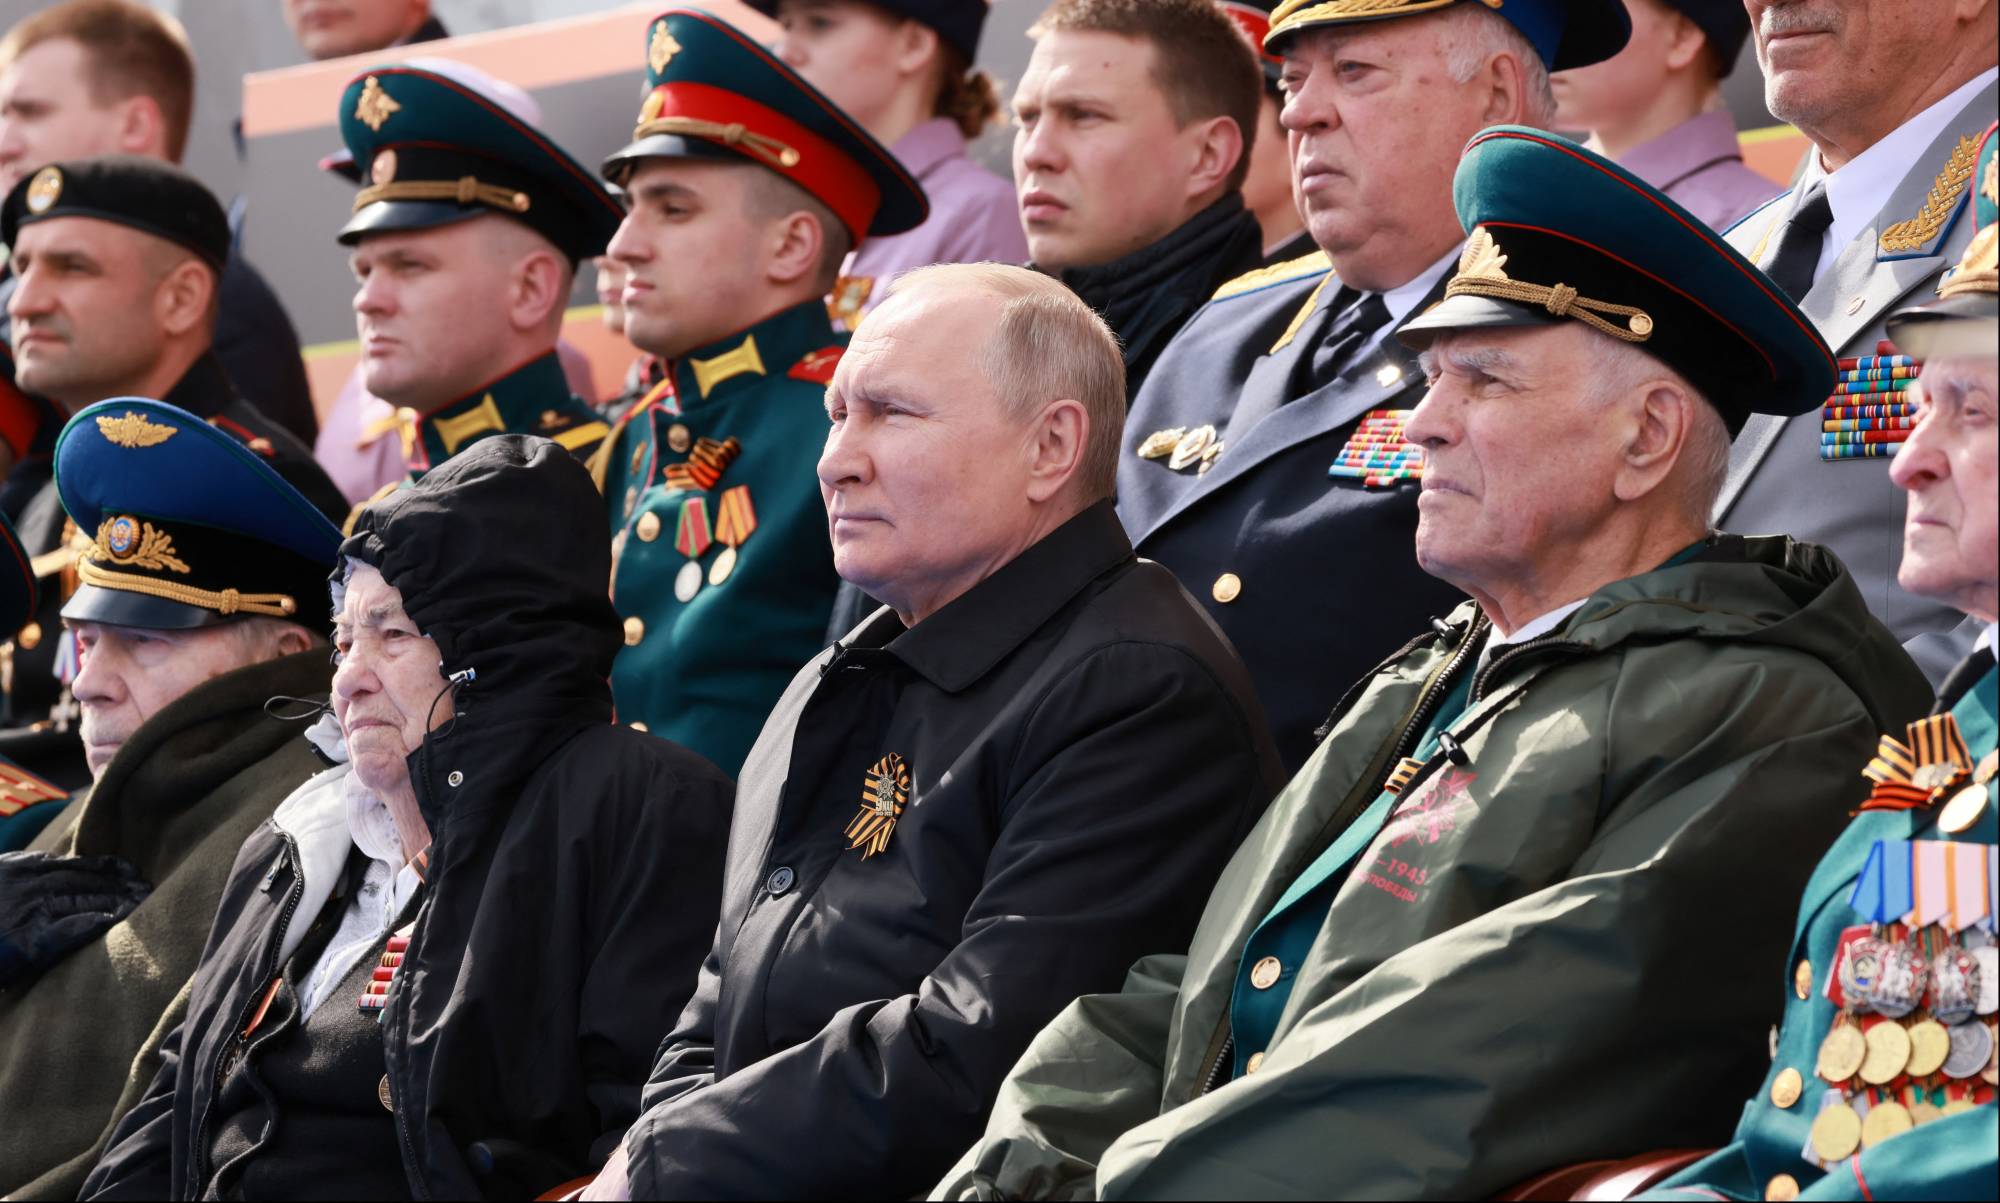 Russian President Vladimir Putin watches a military parade on Victory Day in Red Square in central Moscow on Monday. | SPUTNIK / POOL / VIA REUTERS 